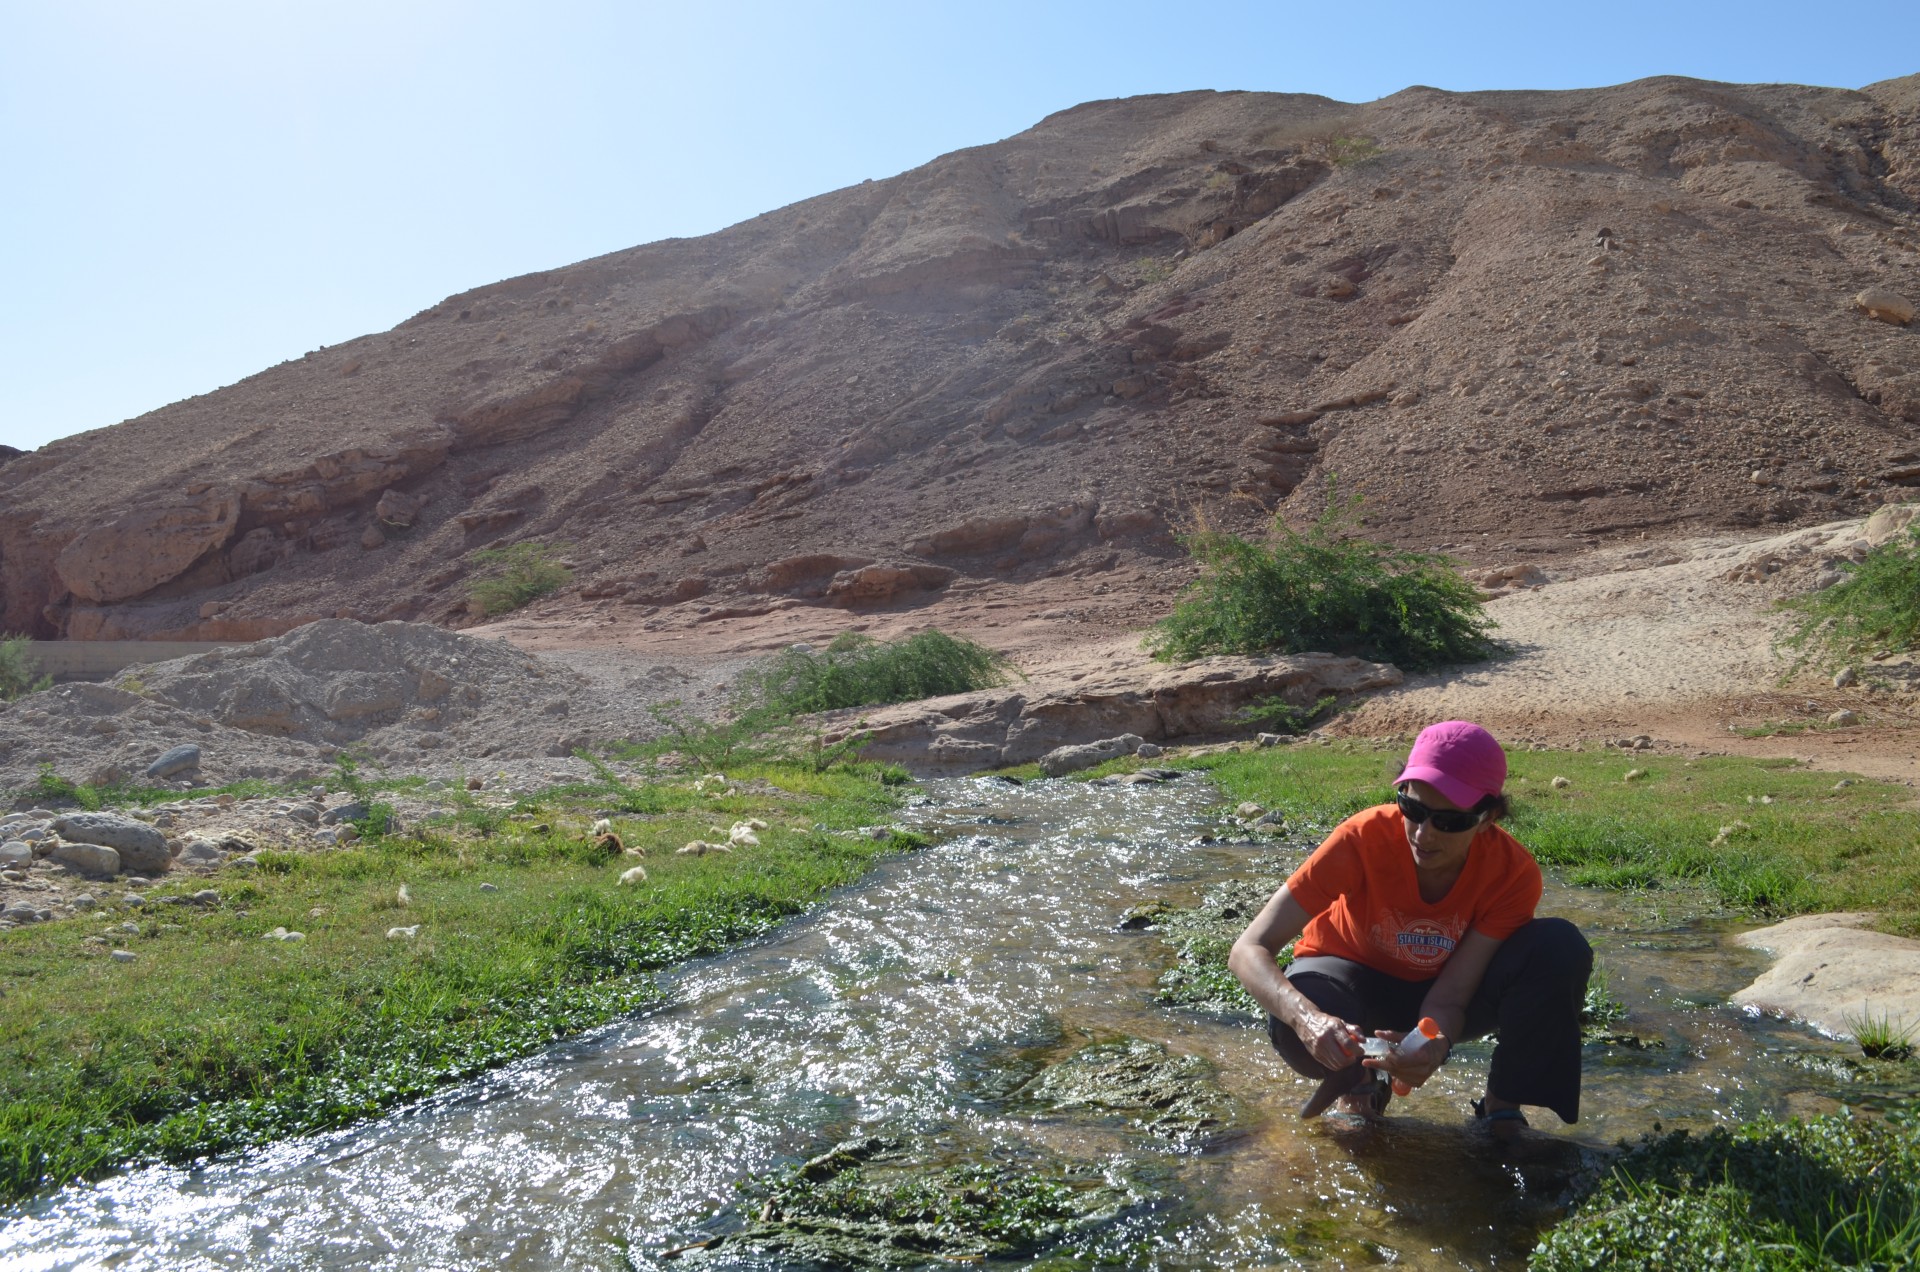 Part of the Dead Sea's water comes from small streams trickling through side canyons. The team sampled a series of these to analyze the water chemistry.